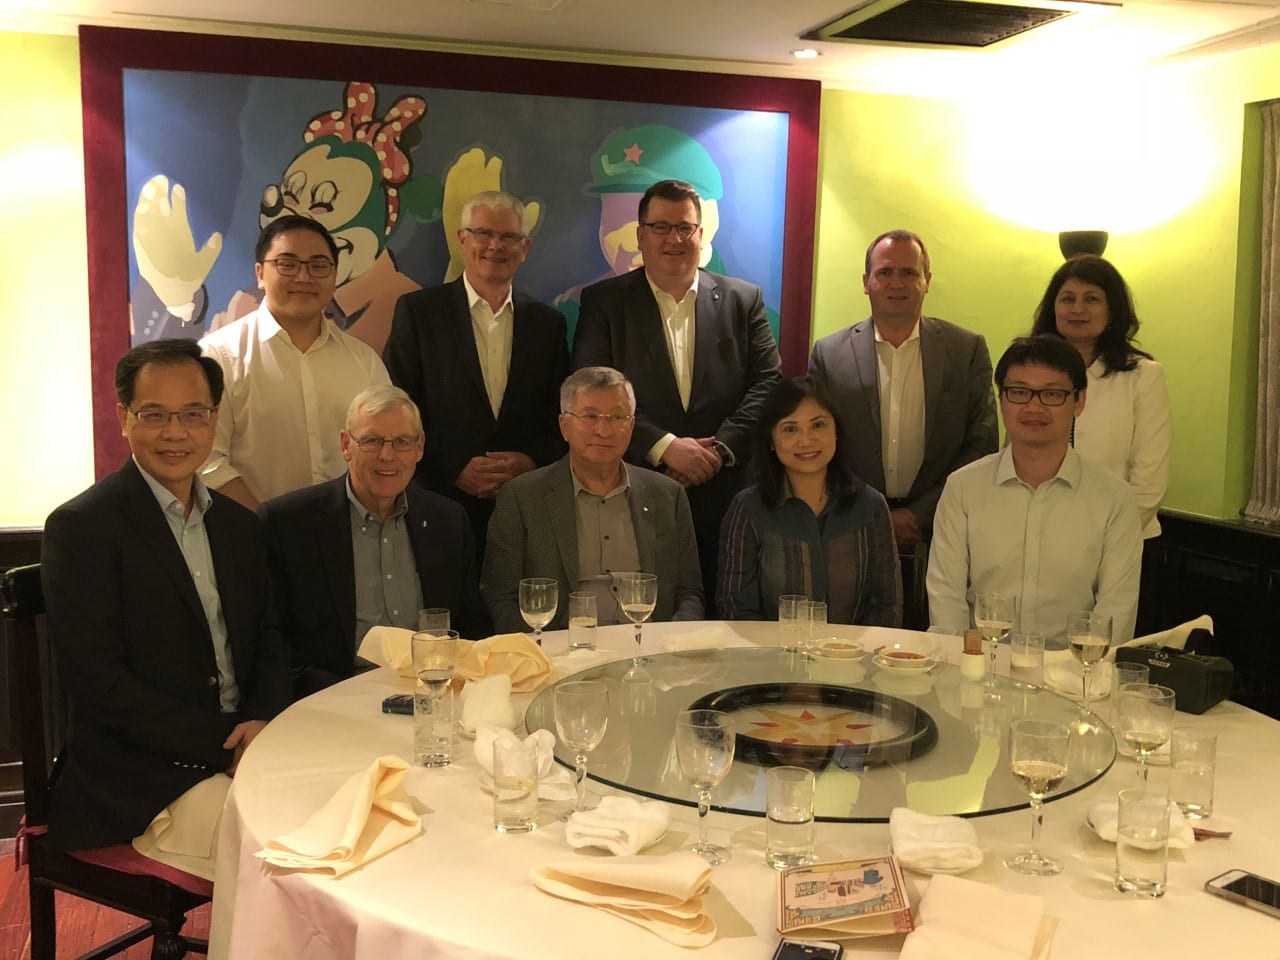 Private Dinner for Dean Emeritus Dezsö J. Horváth hosted by the group, Hong Kong, May, 2018. Pictured Front Row L to R: Thomas Luk, Bill Graham (MBA '86), Dean Emeritus Dezsö J. Horváth, Helen Wong (IMBA '92), Adrian Chau (MBA '00). Back Row L to R: Wilbert Luk, Rob Hines, David Bell, Professor Matthias Kipping, and Aloma Gravel.